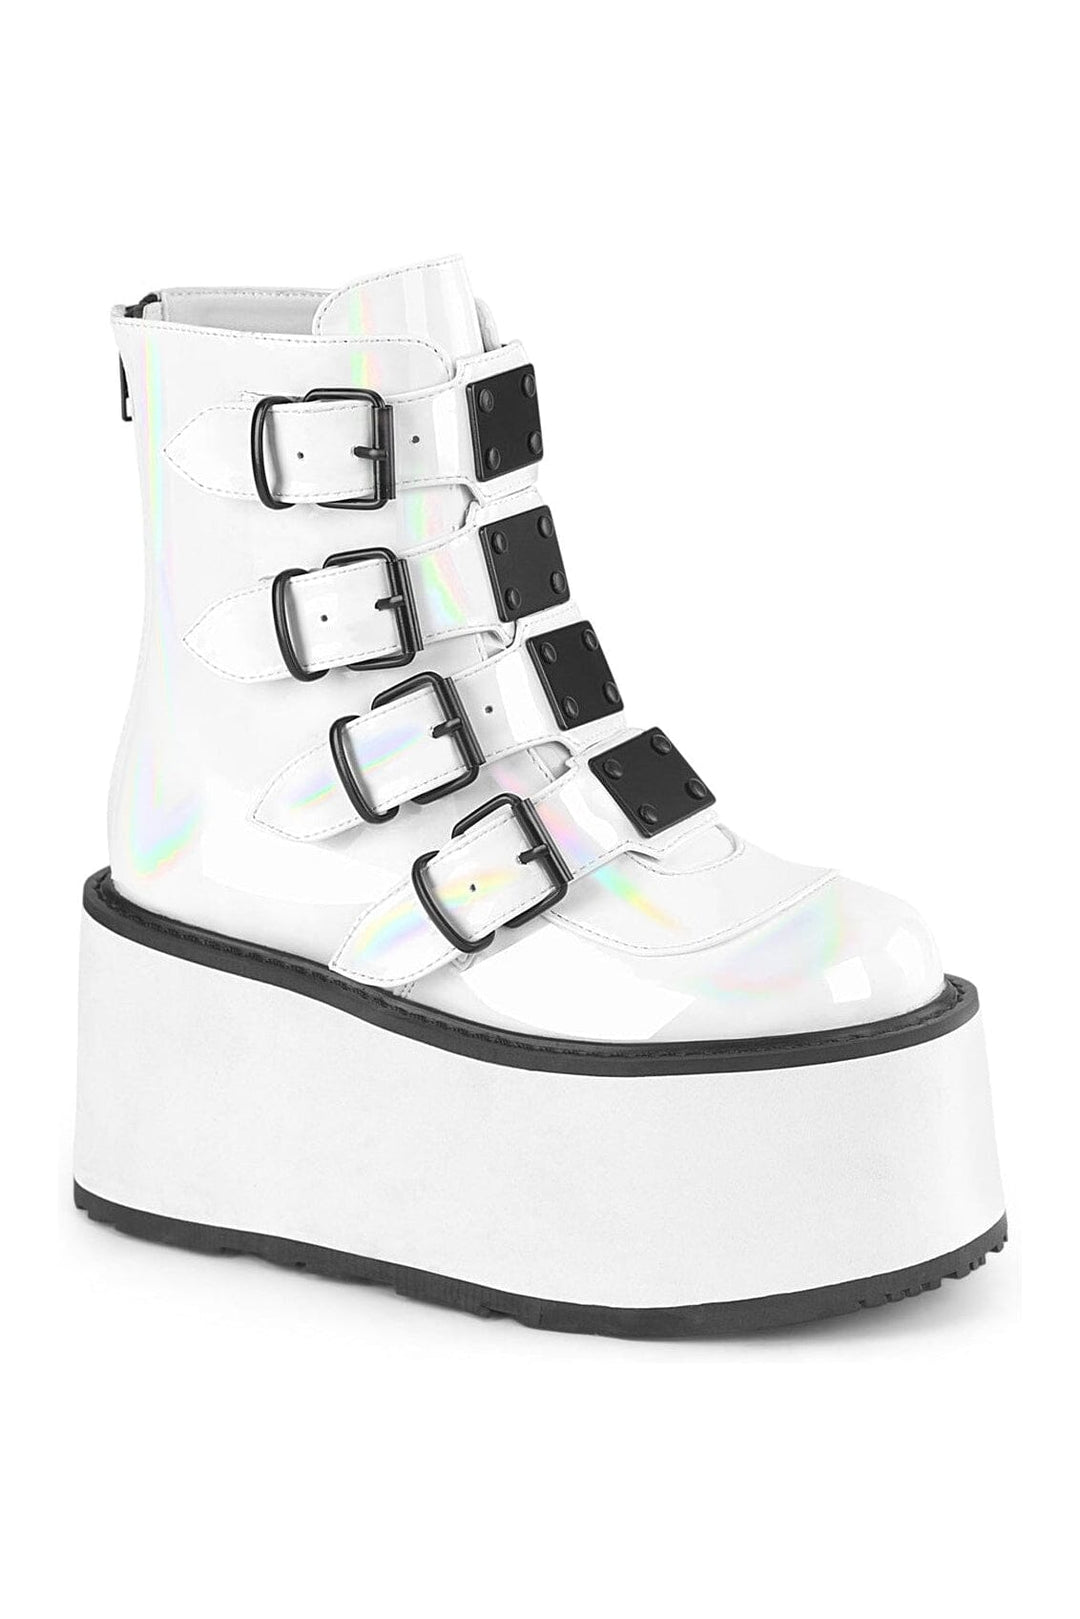 DAMNED-105 White Hologram Patent Ankle Boot-Ankle Boots-Demonia-White-10-Hologram Patent-SEXYSHOES.COM